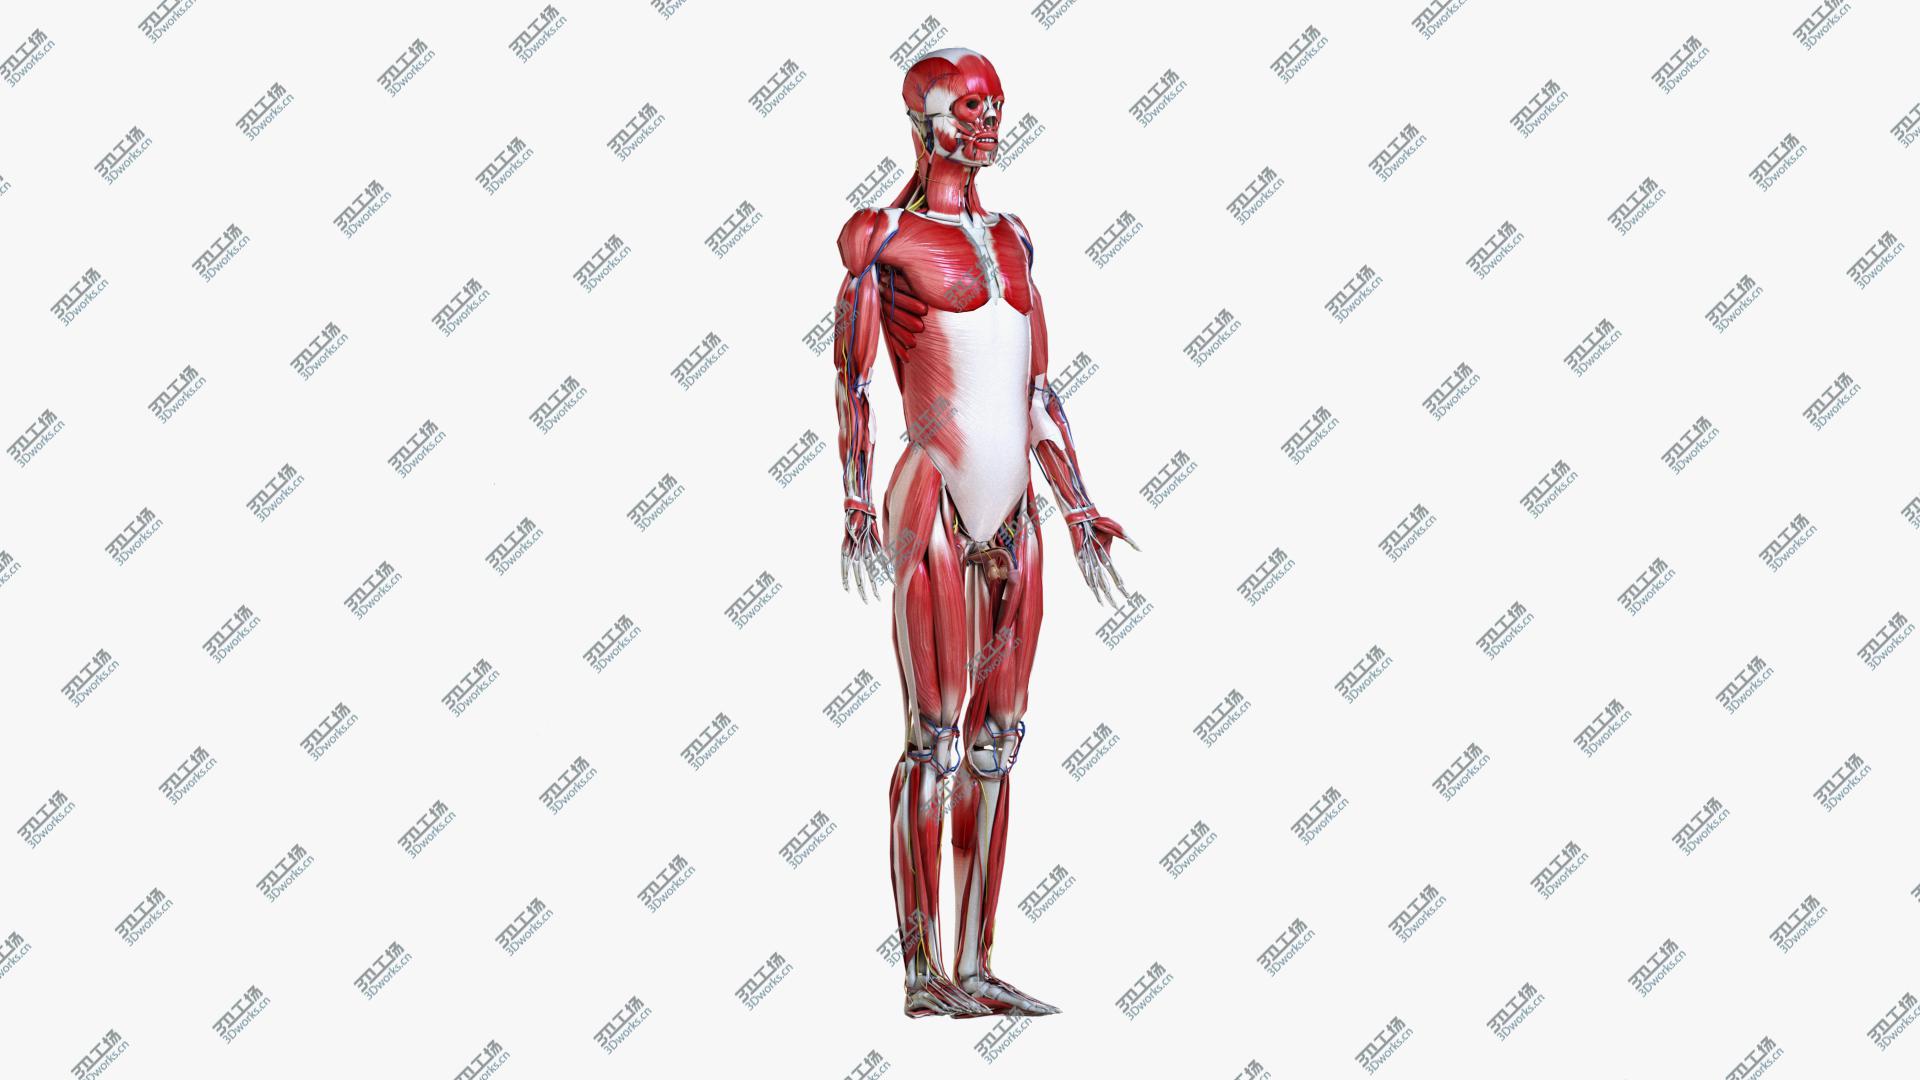 images/goods_img/20210113/3D Full Male And Female Anatomy Low Poly Set/5.jpg